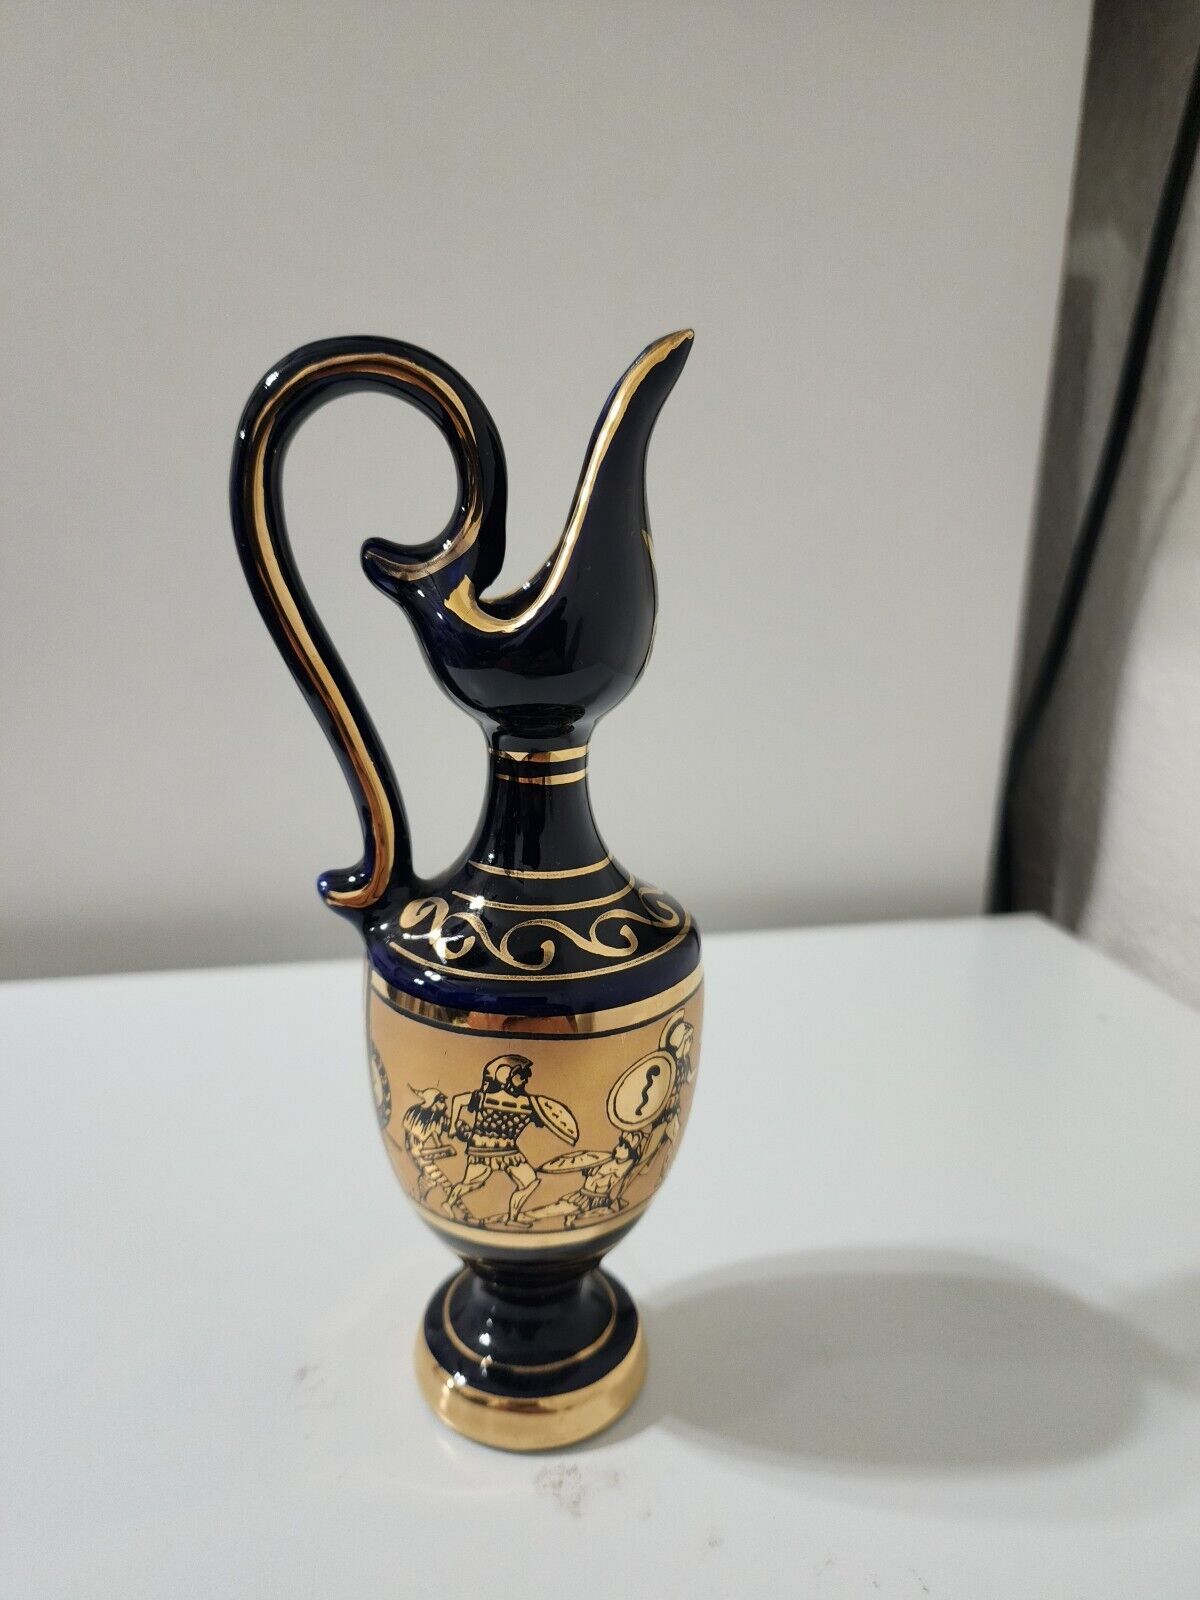 Vintage Neofitou  Vase 24K Gold Accents Hand Made in Greece Very Nice Condition.